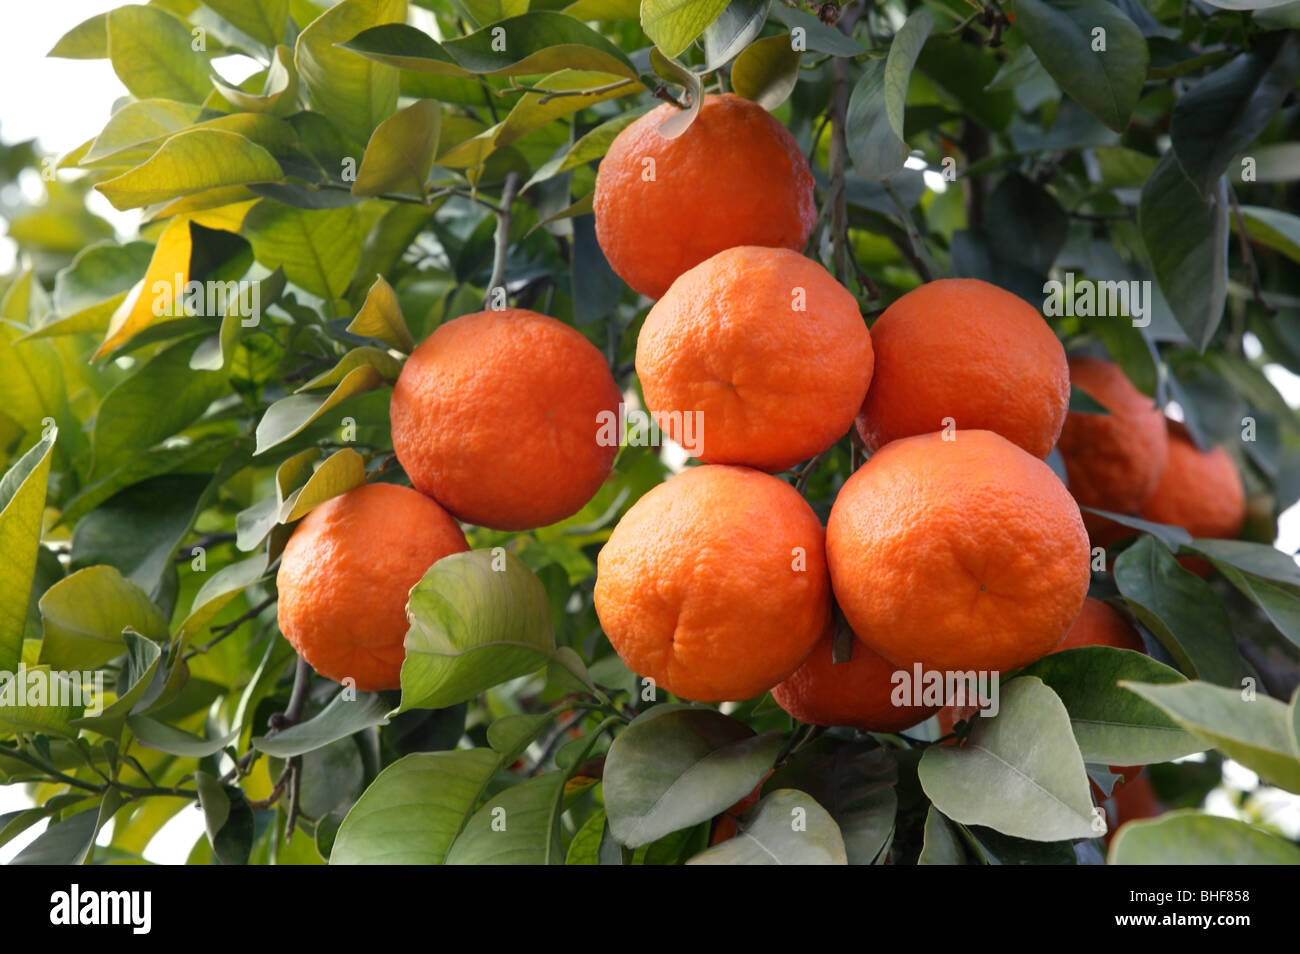 Ripe oranges growing on tree in Marrakech, Morocco. Stock Photo